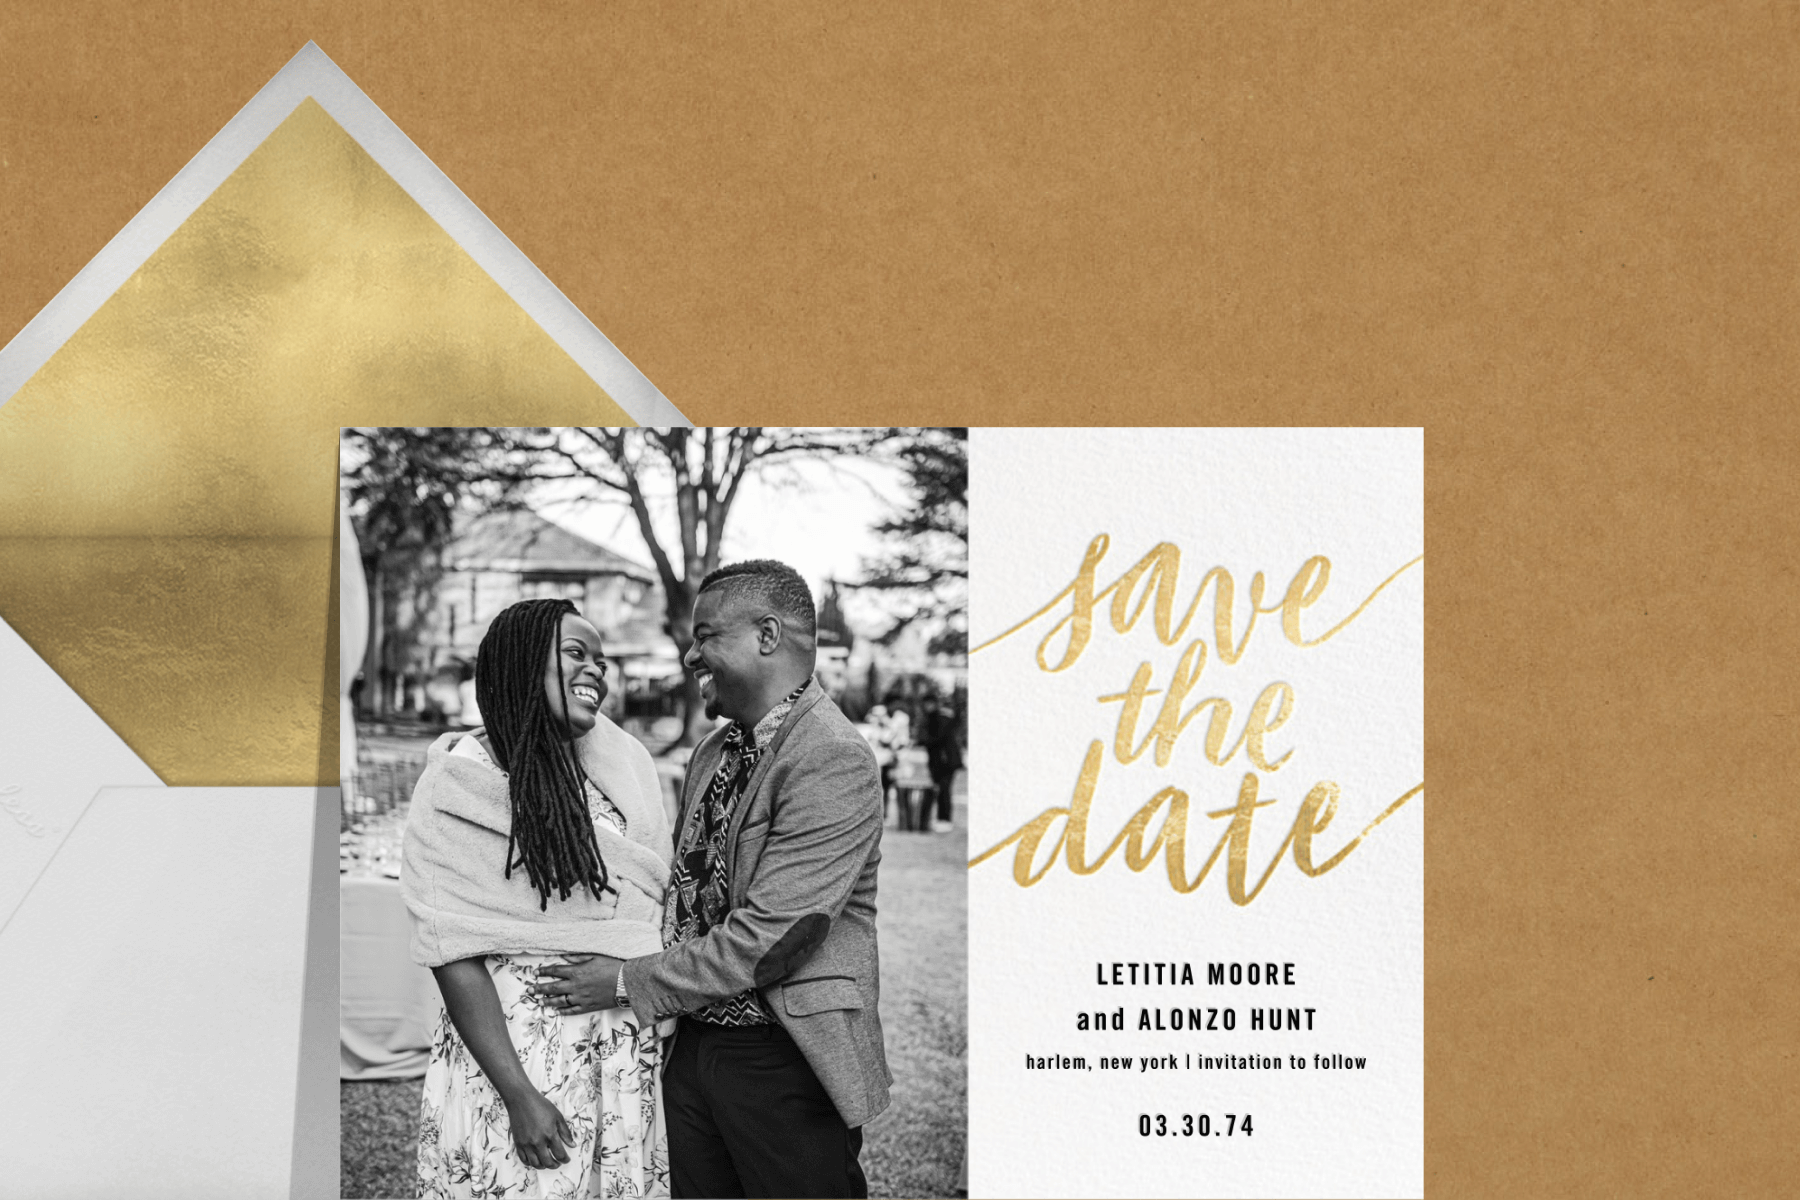 save the date with a black and white photo of a man and woman embracing and gold script lettering